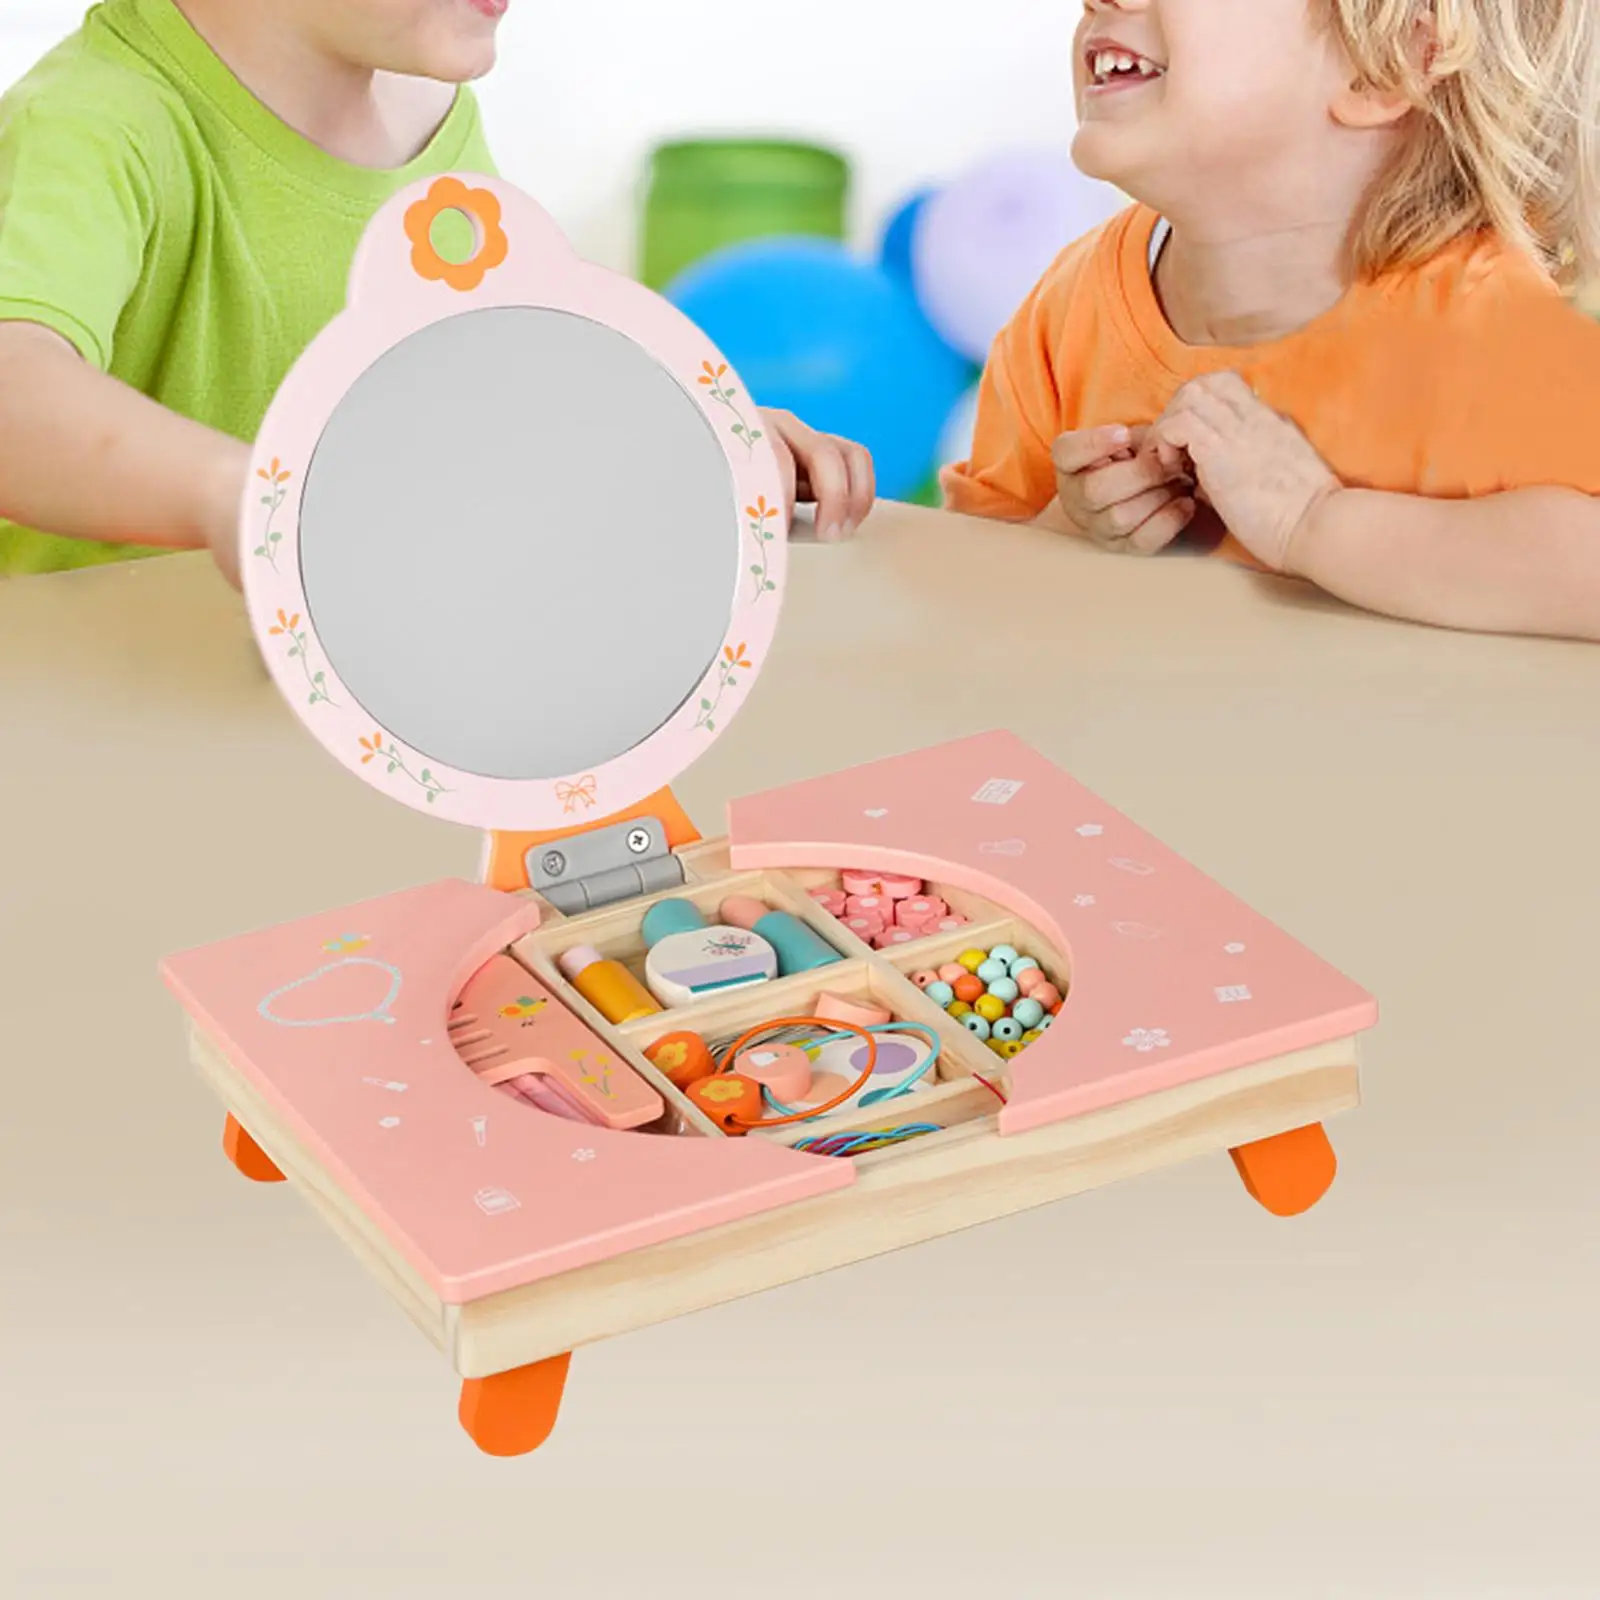 Tabletop Pretend Play Vanity Toy Playset Folding Dresser Toy Early Learning Educational Toys Kids Makeup Vanity Toy for Toddlers